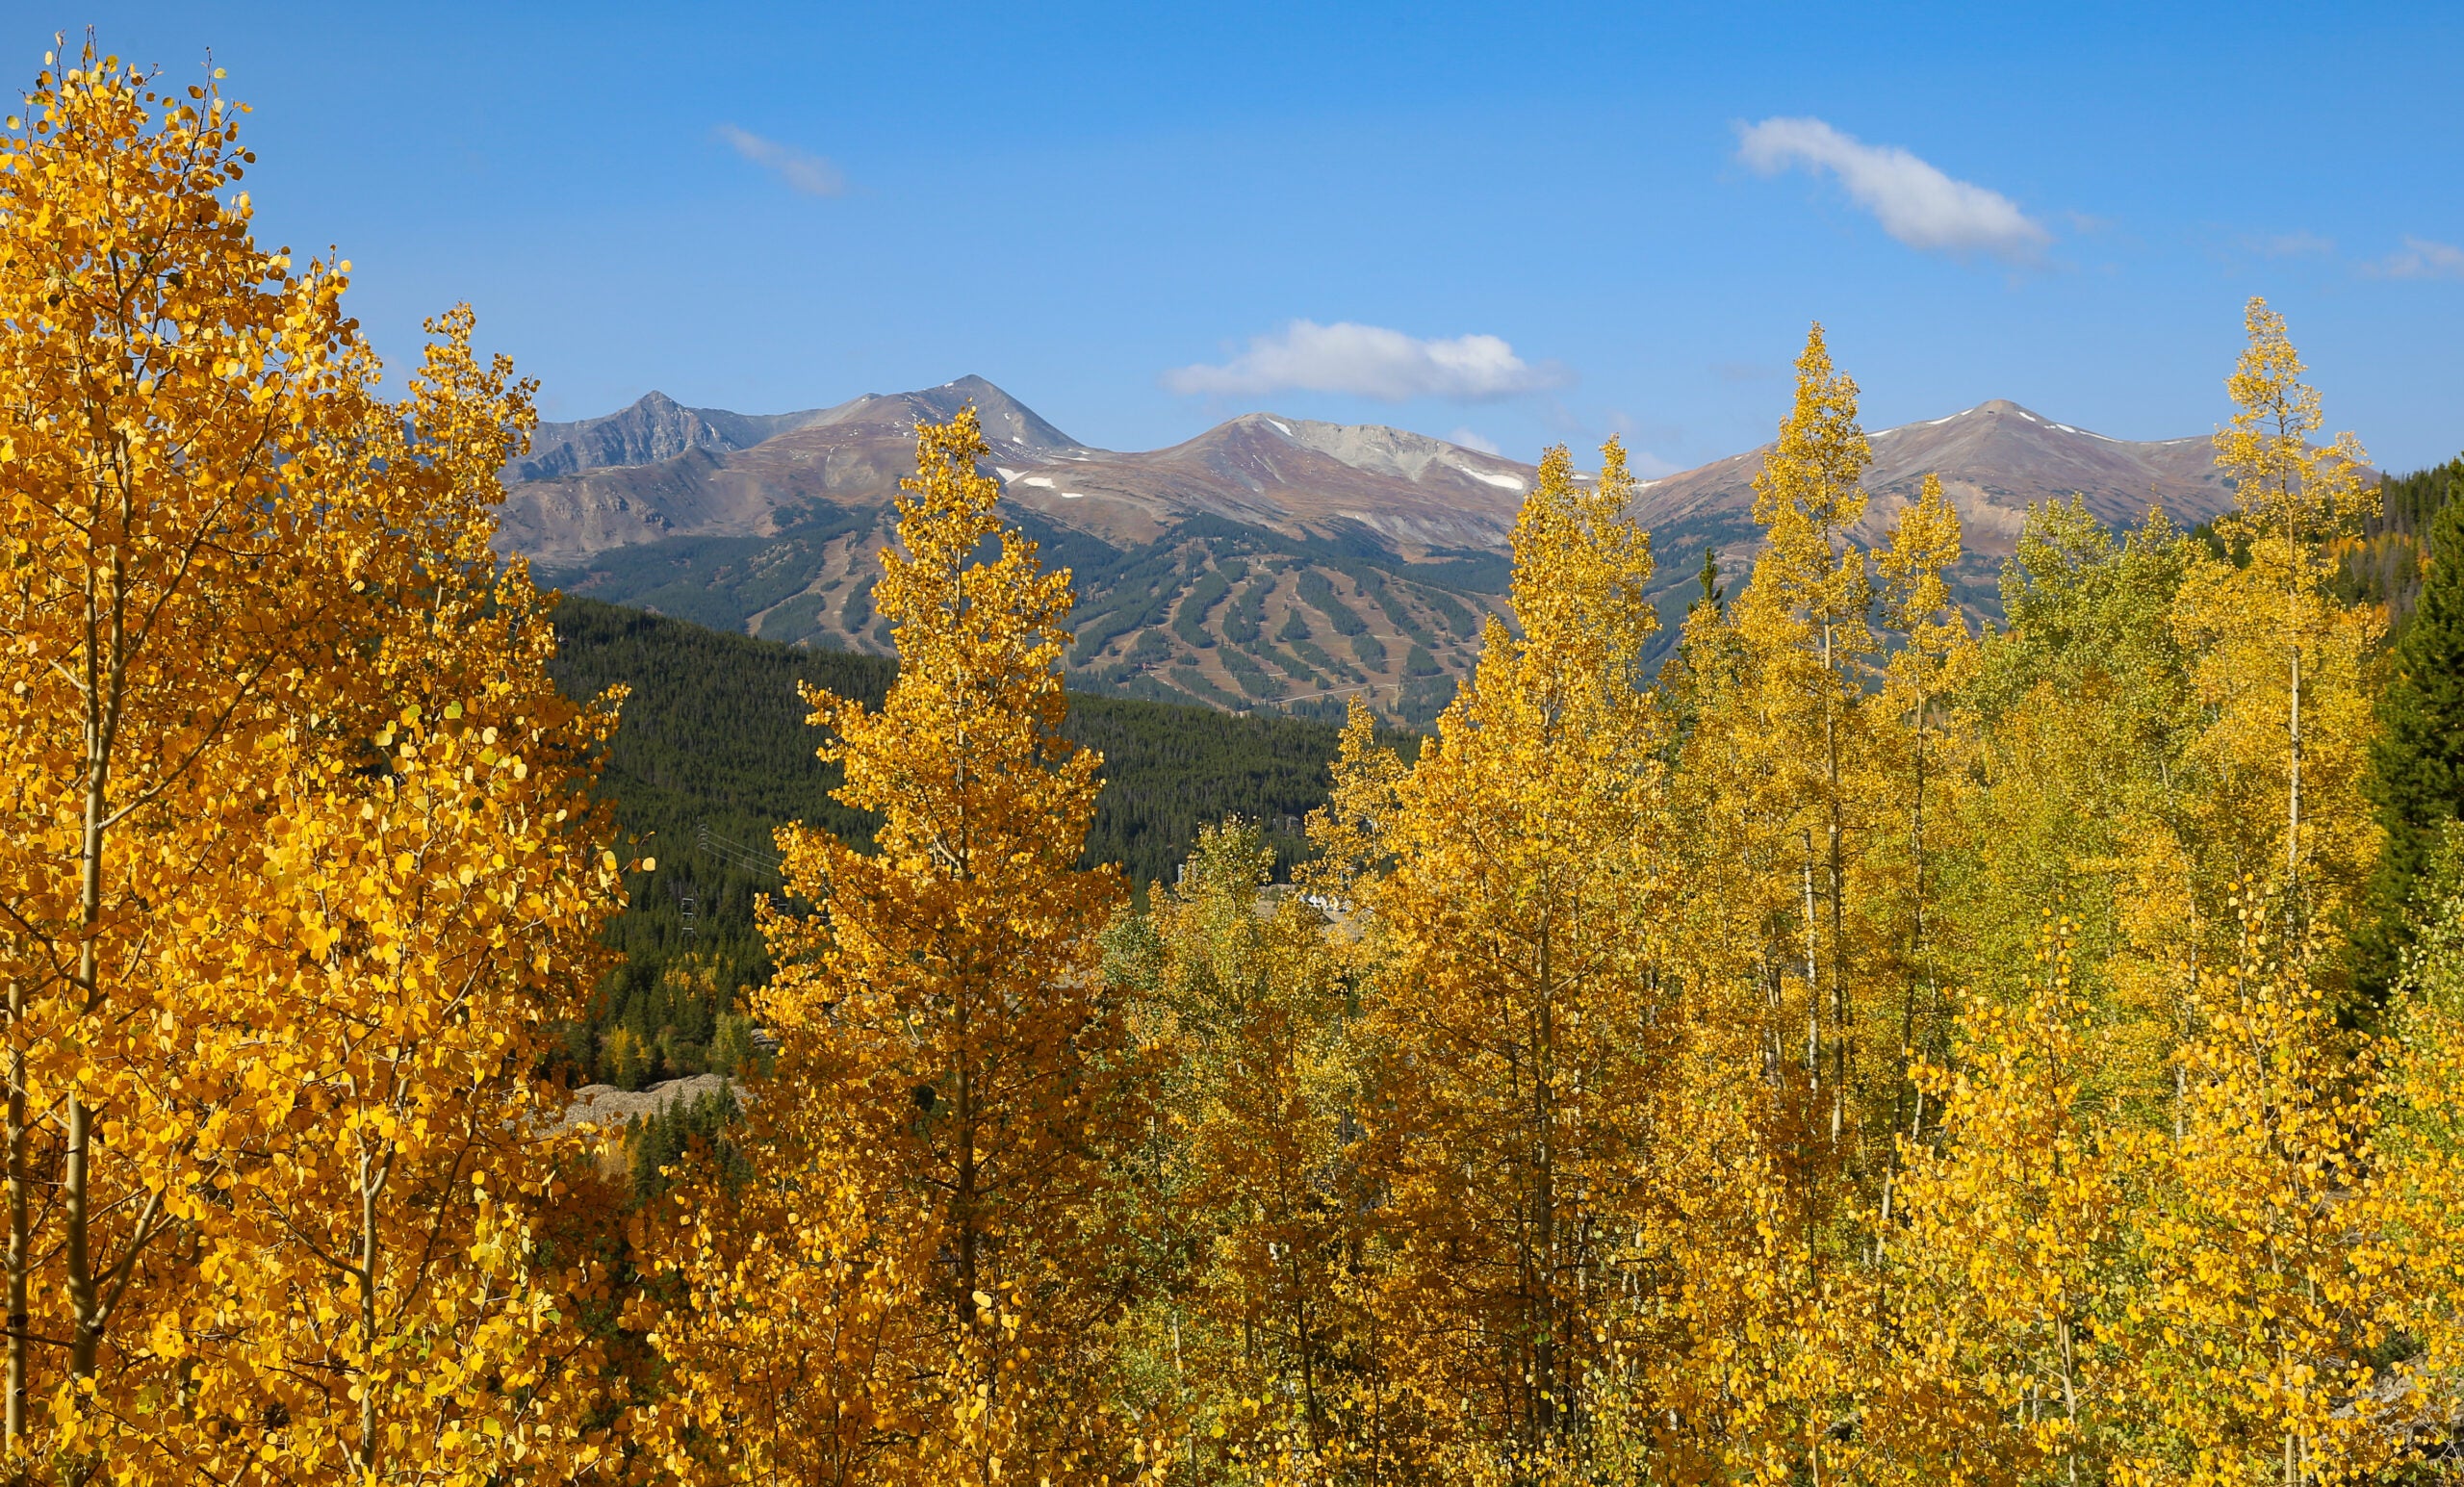 Autumn leaves with mountains in the background near Breckenridge, Colorado